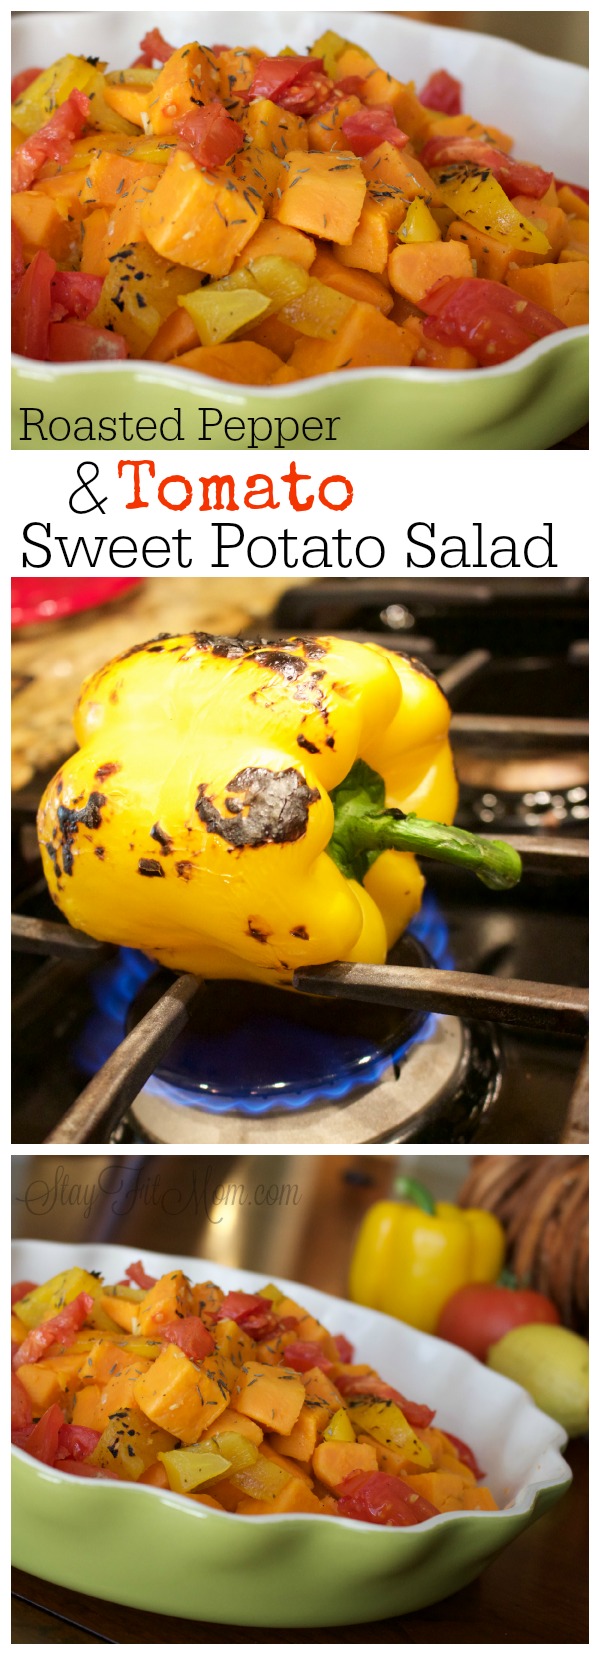 Super Easy Whole 30 side dish